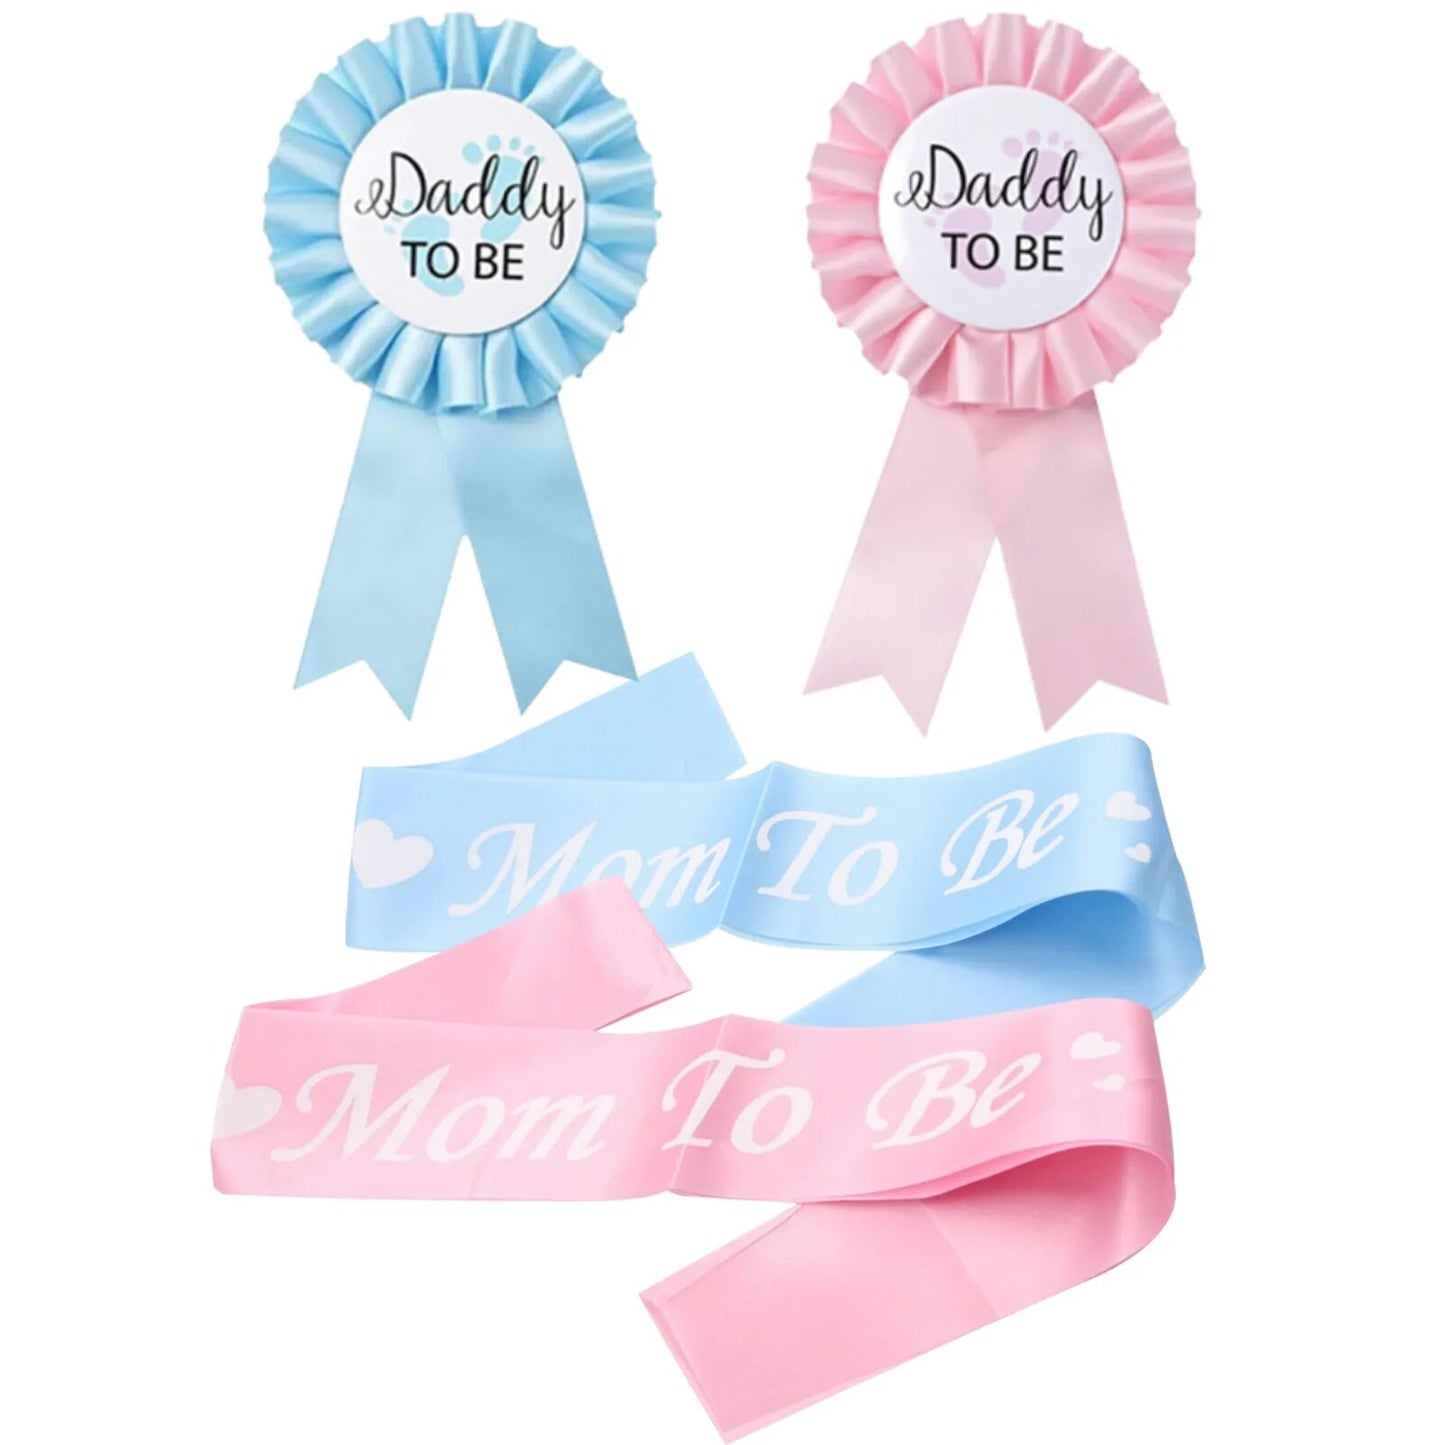 4pcs Party Kit: Gender Reveal Photo Prop, Daddy Badge Pin, Mummy To Be Sash, Welcome Memory.